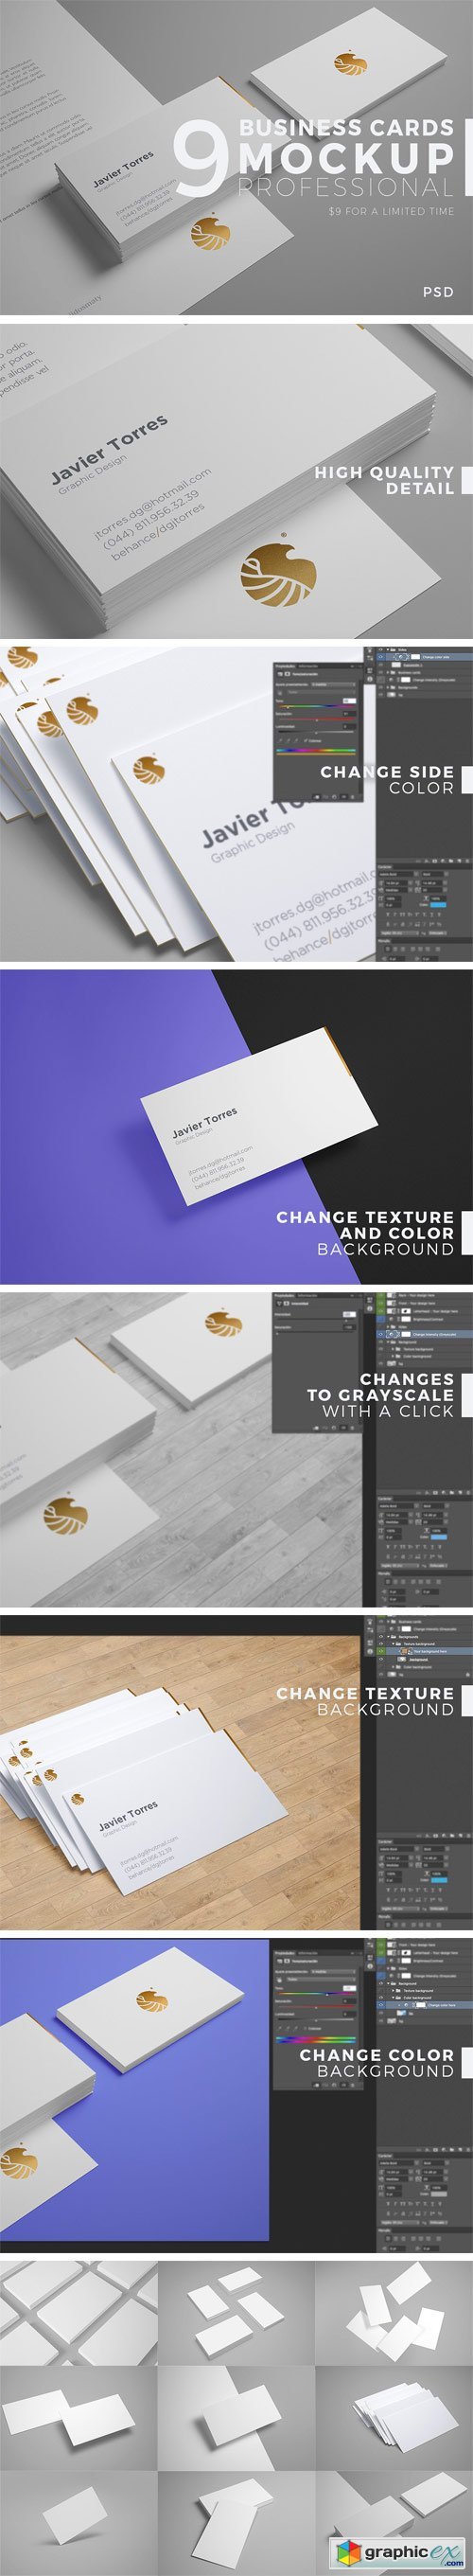 9 Business Cards Mockup Professional